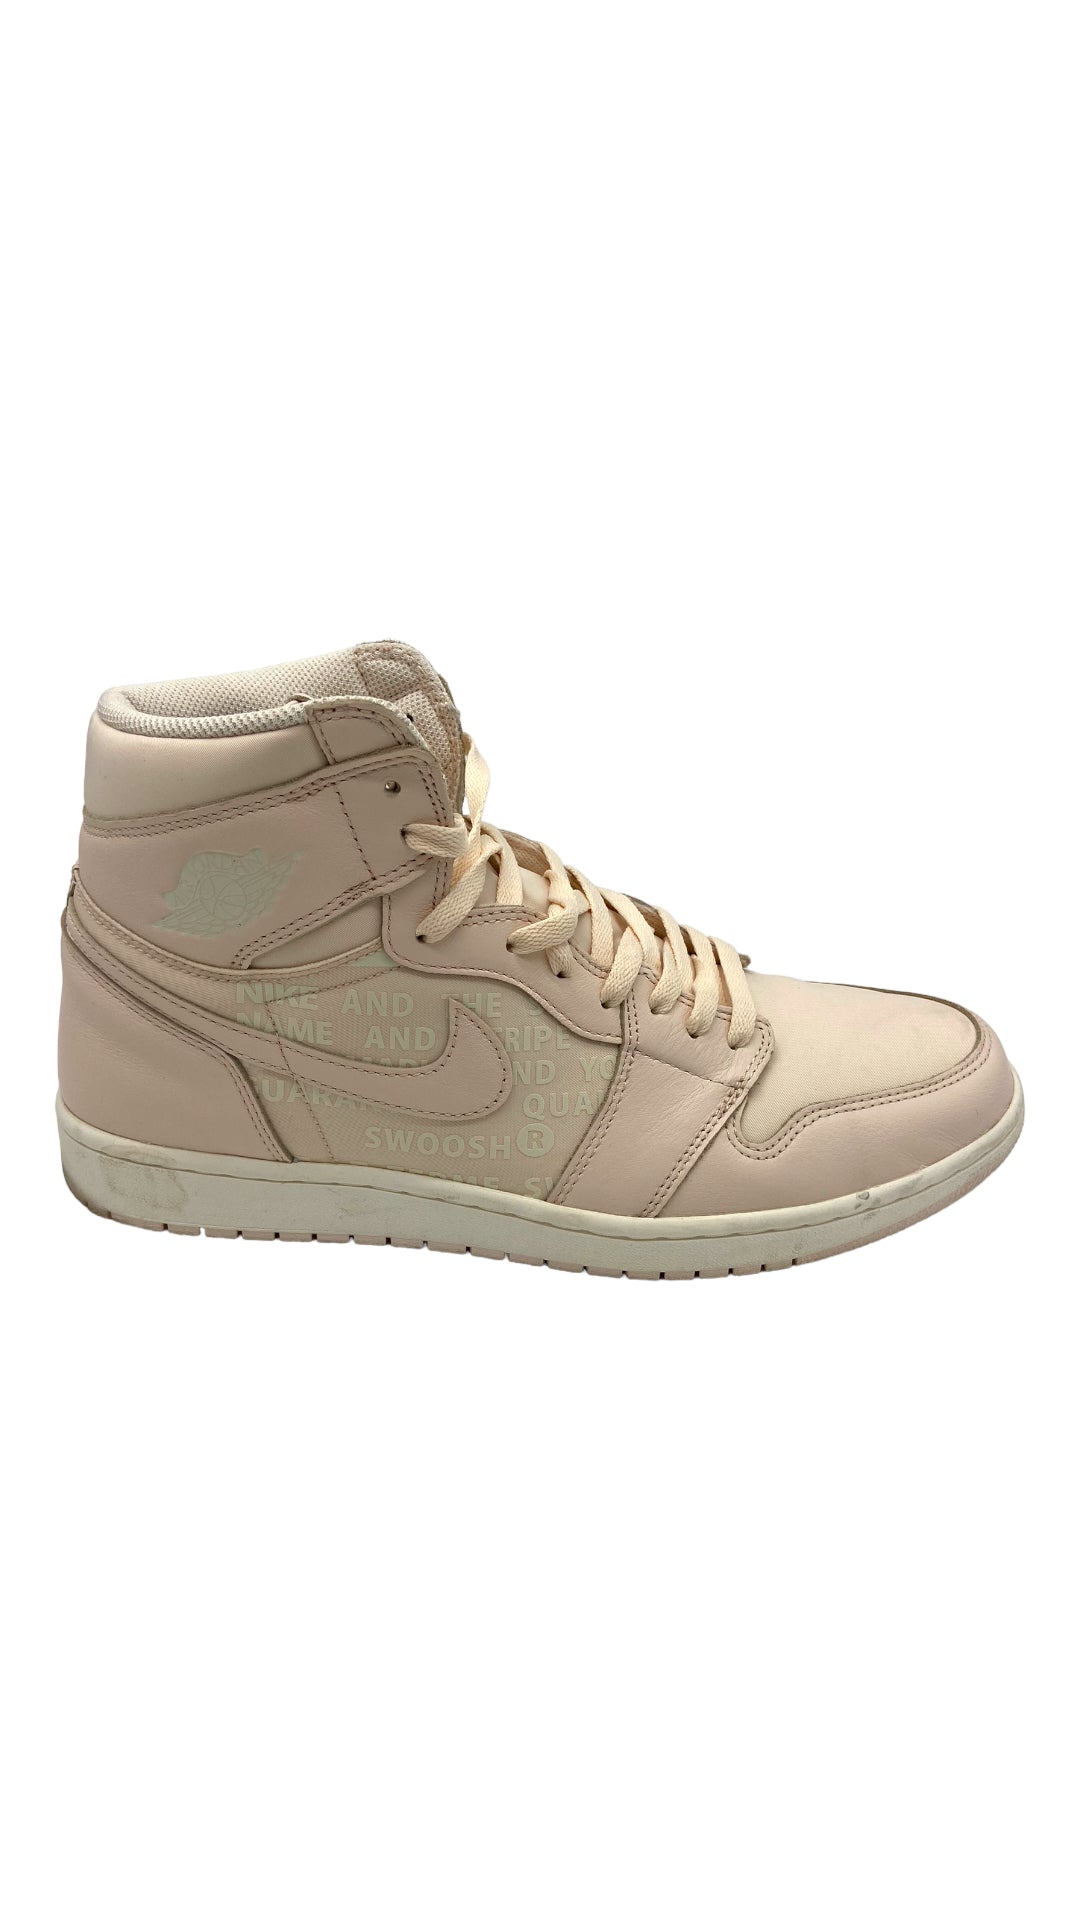 Load image into Gallery viewer, Preowned Jordan 1 Retro High Guava Ice Sz 13
